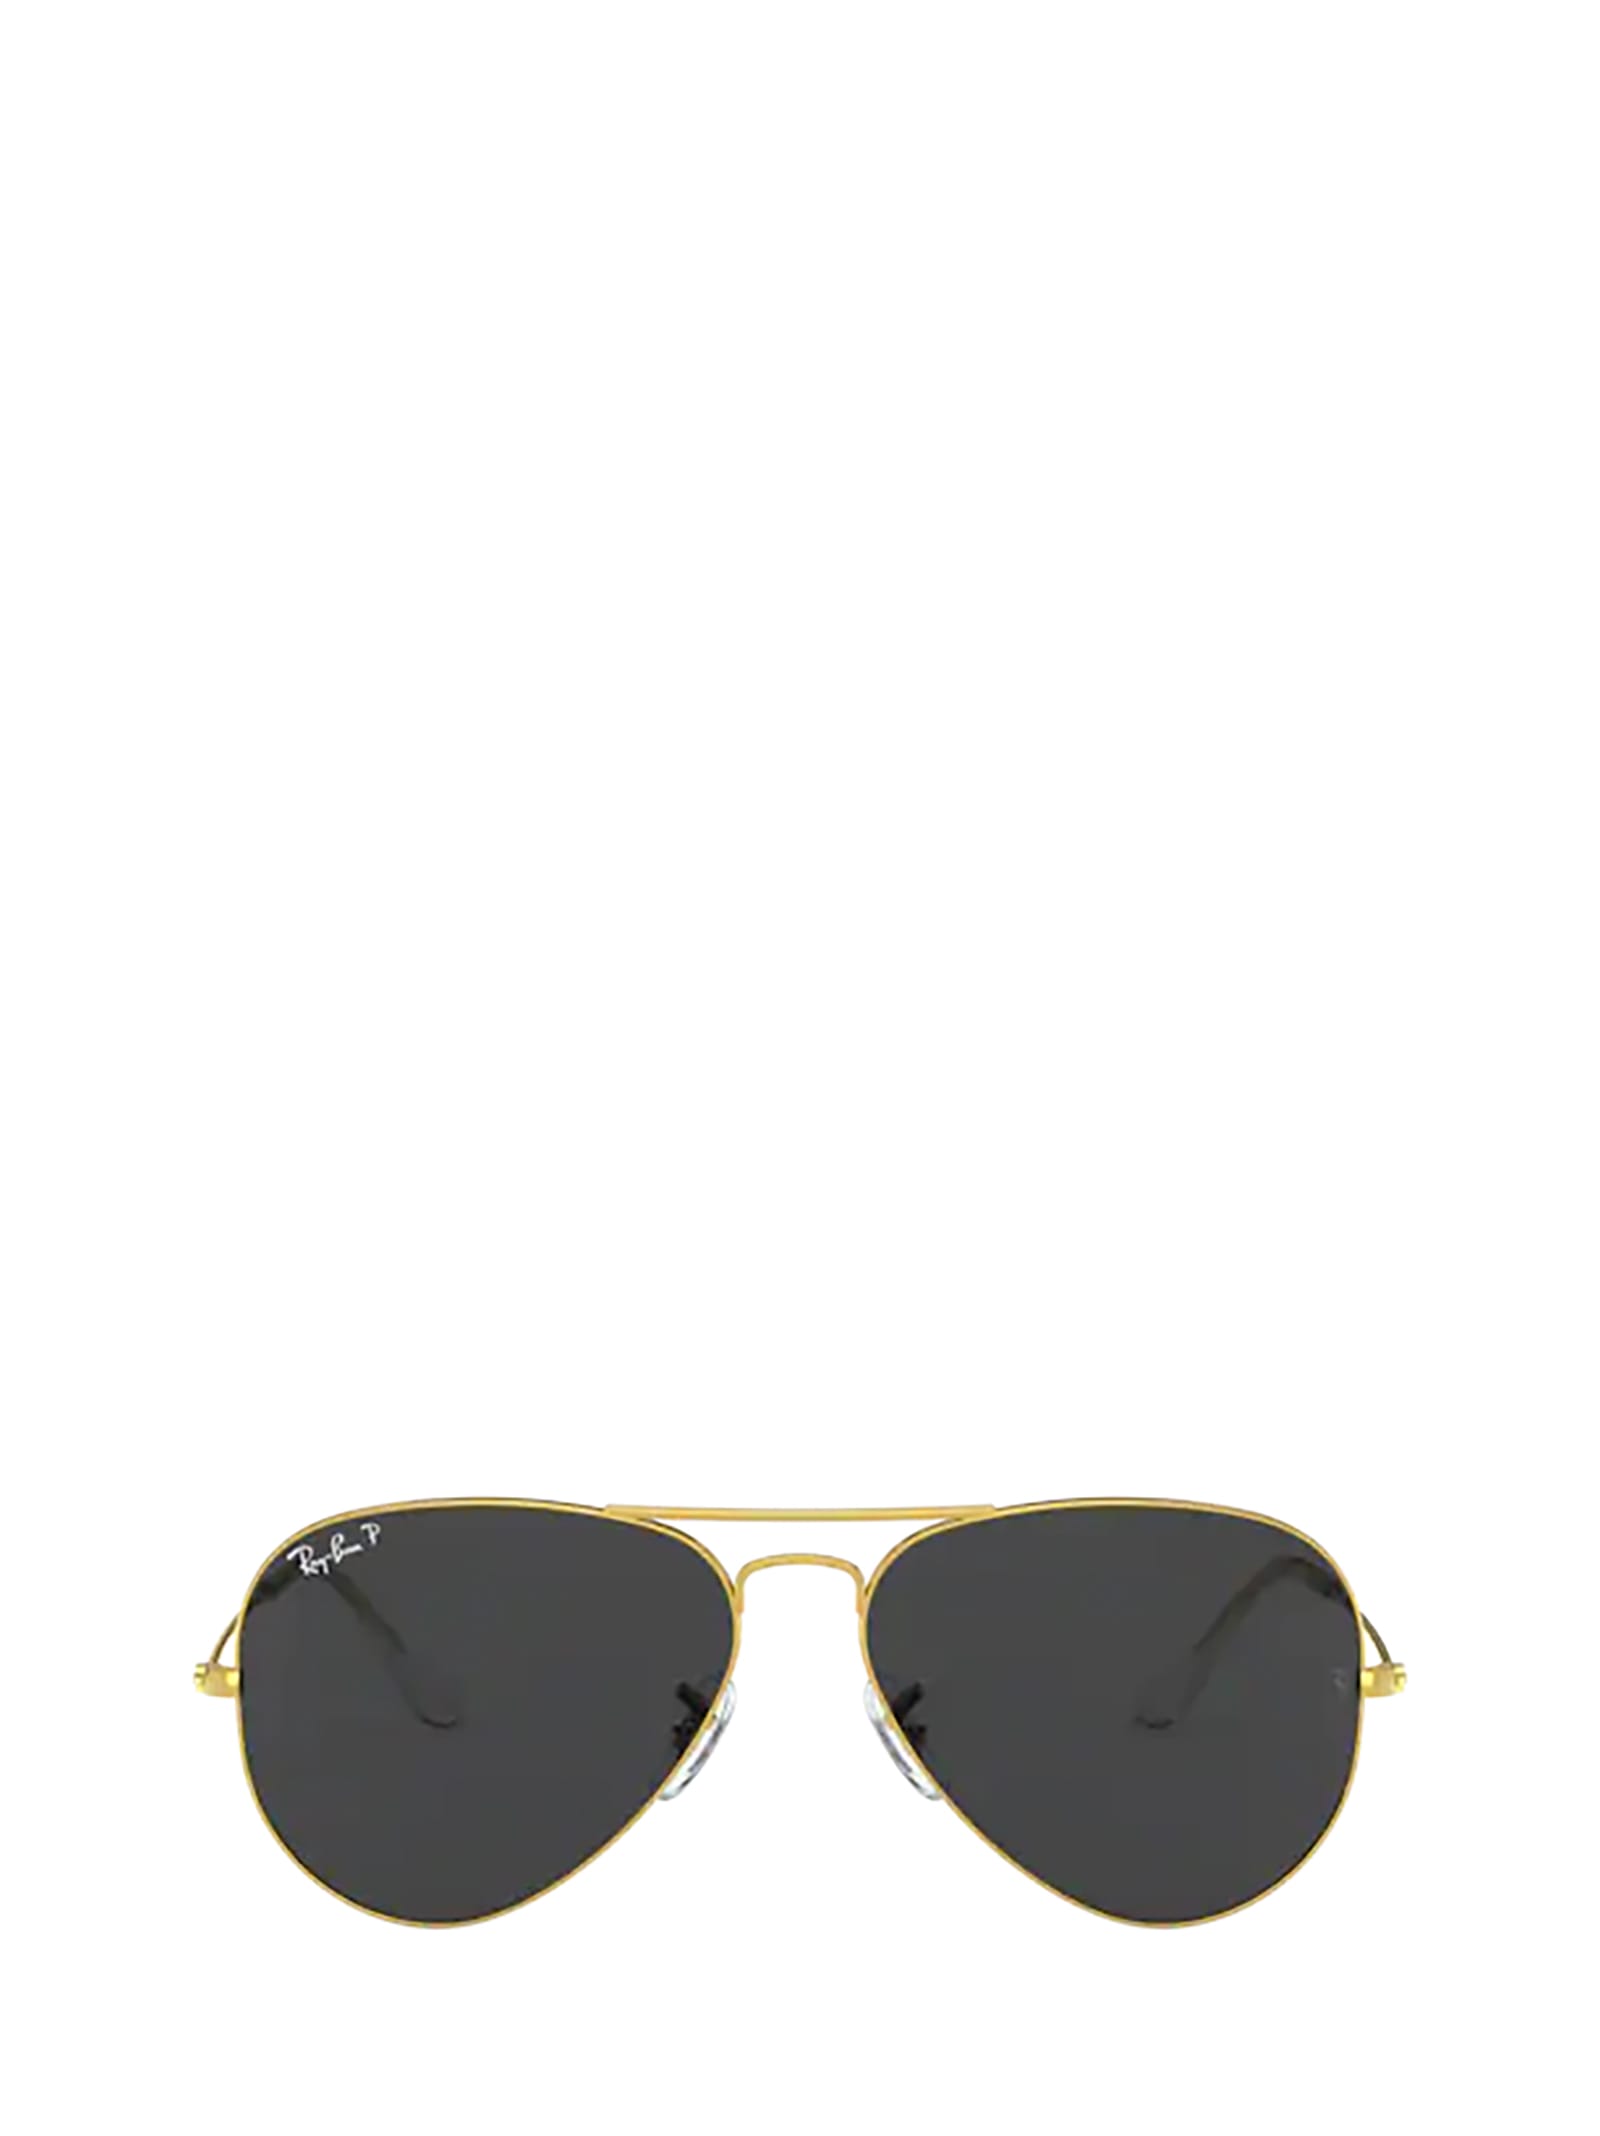 Shop Ray Ban Ray-ban Rb3025 Legend Gold Sunglasses